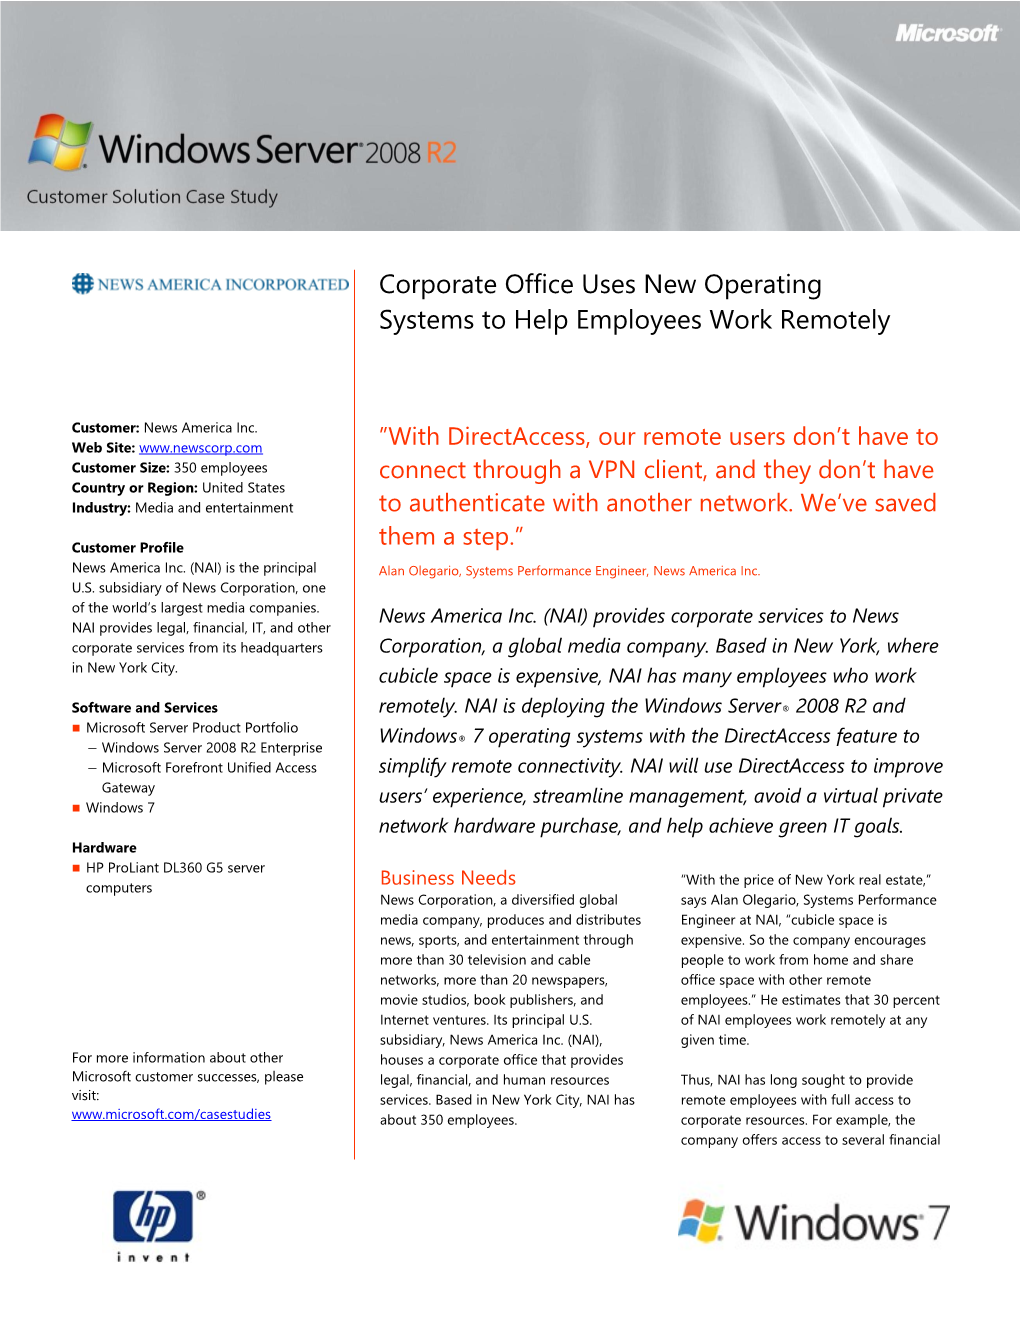 Corporate Office Uses New Operating Systems to Help Employees Work Remotely